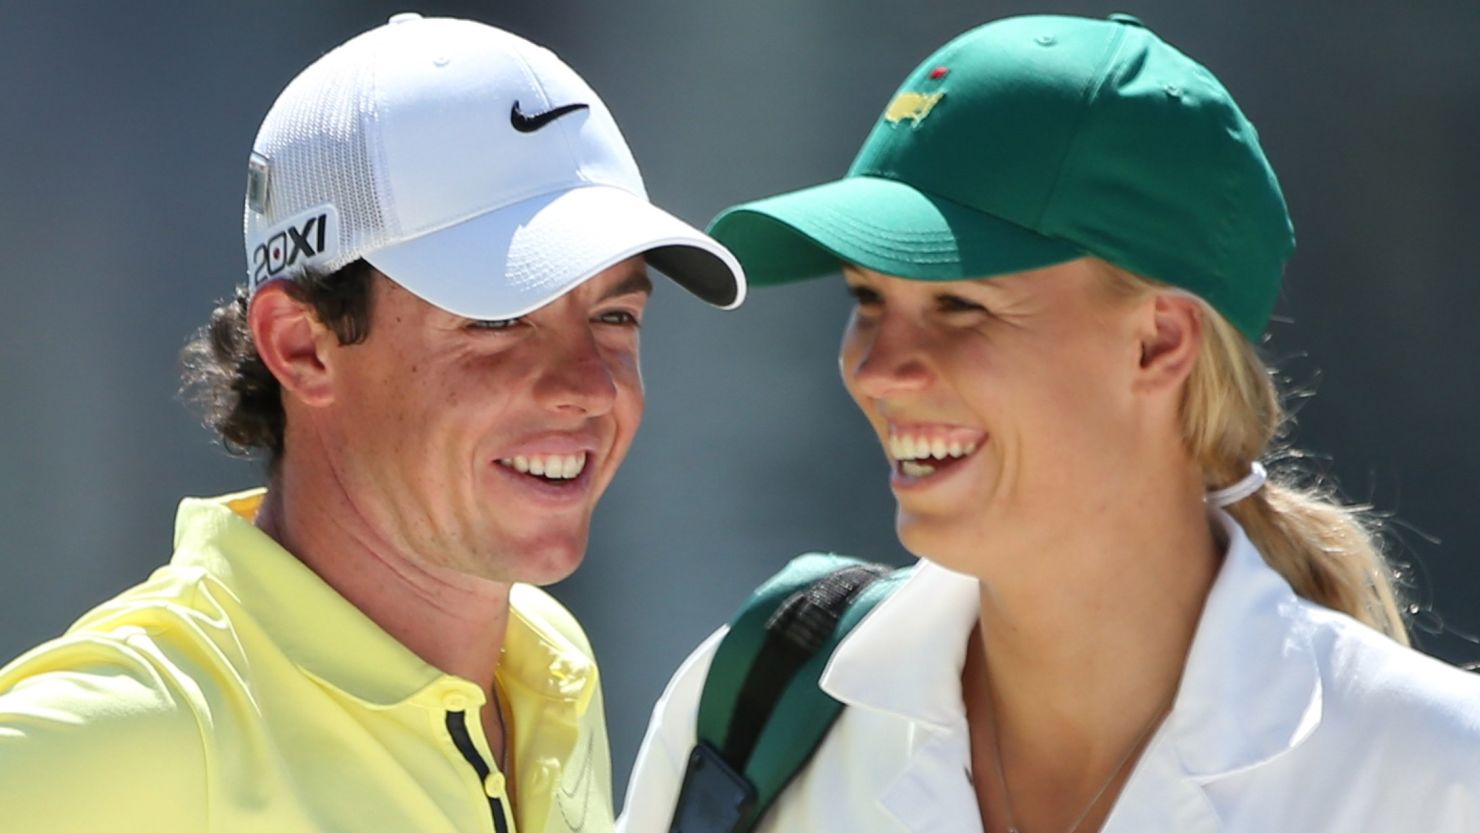 Rory McIlroy and Caroline Wozniacki announced their engagement on New Year's Eve.